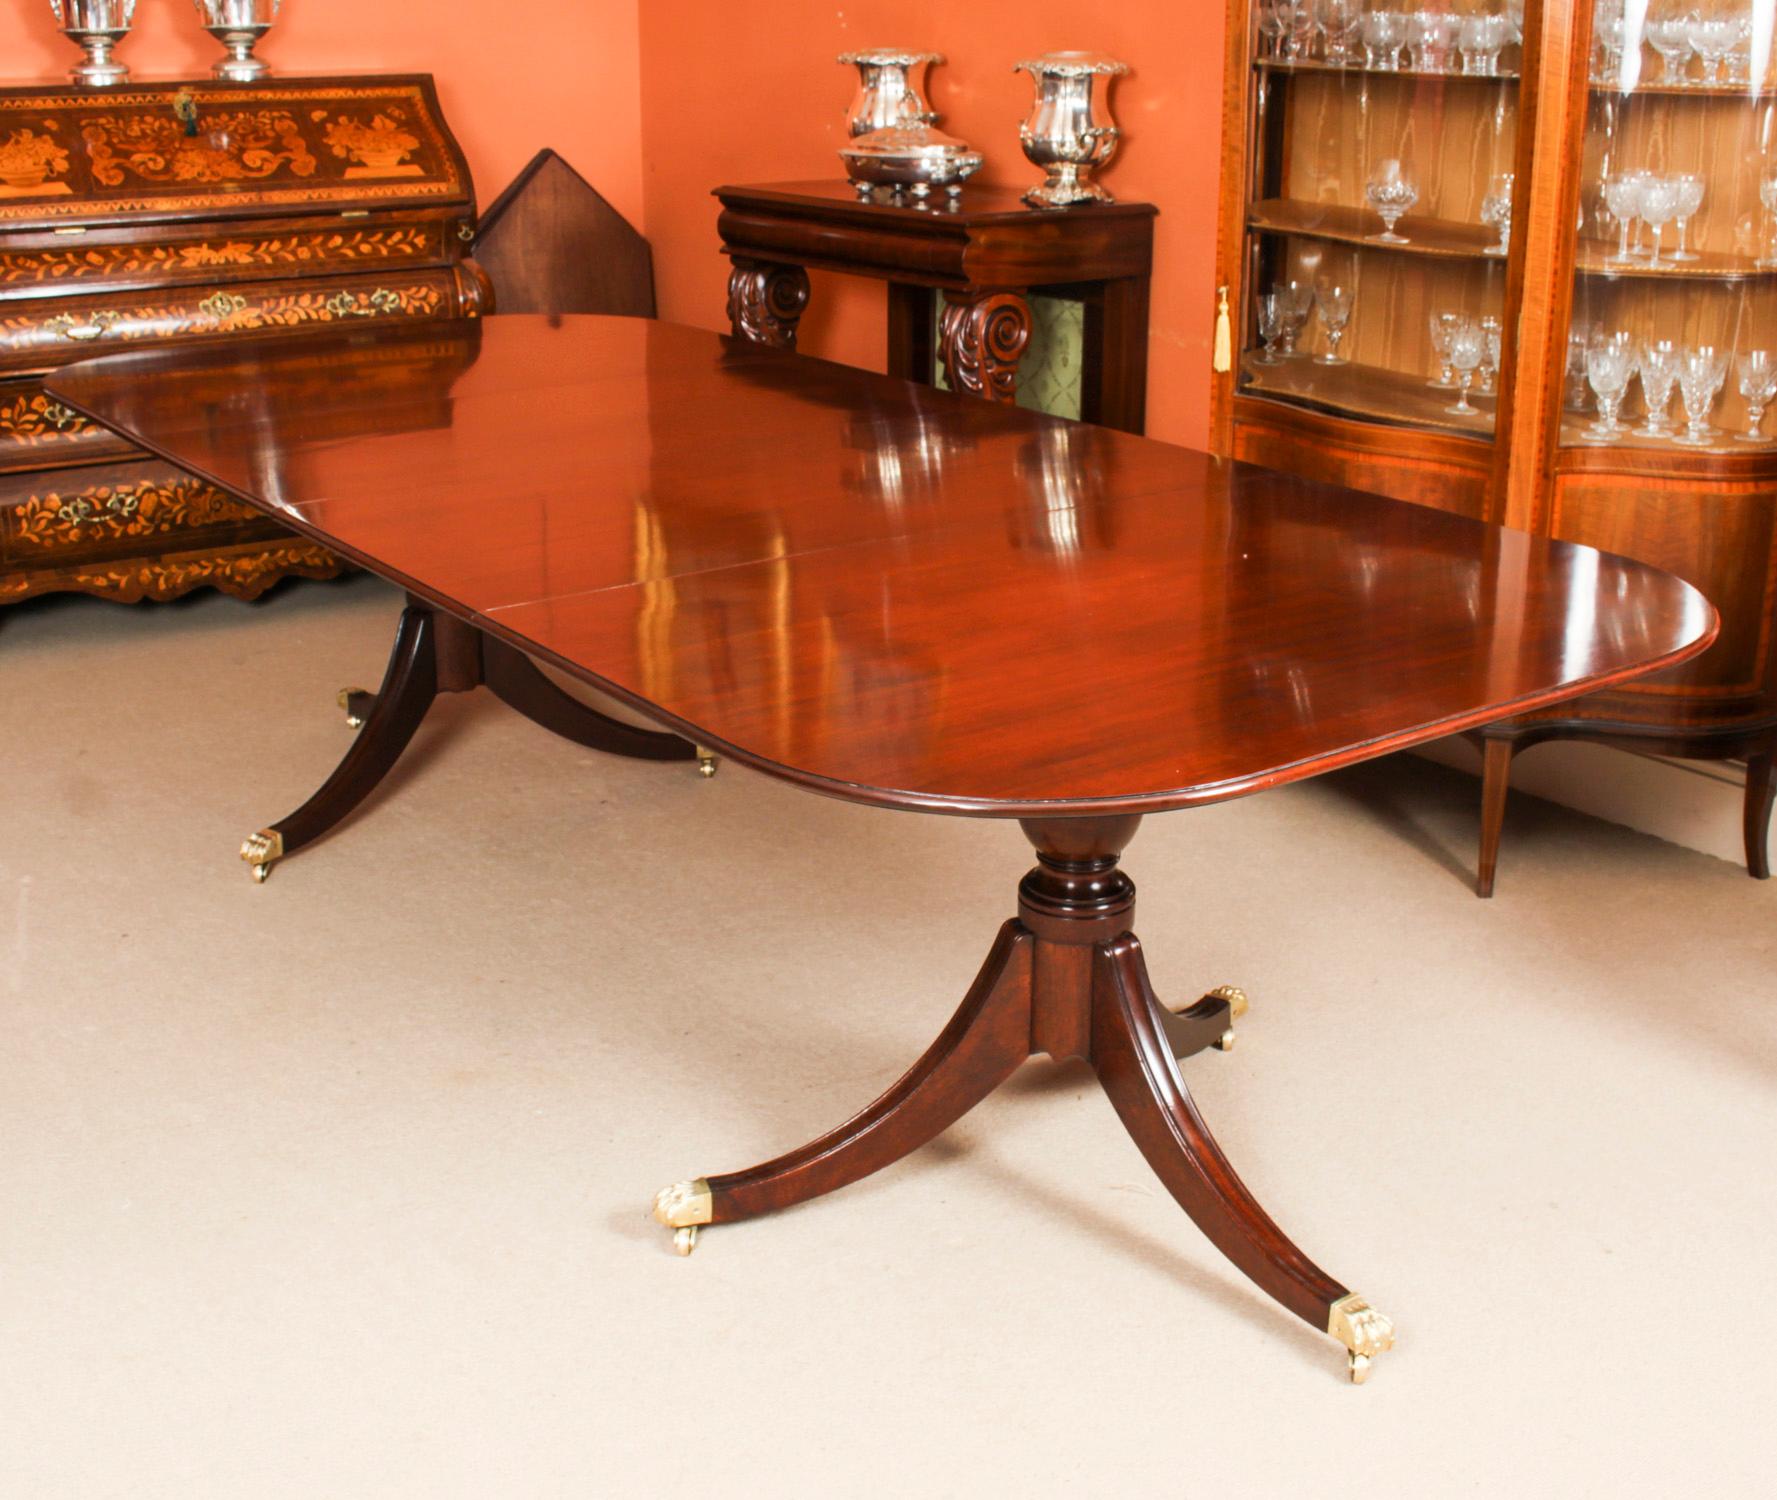 This is an elegant antique period George III dining table, Circa 1780 in date.

The table is raised on twin bases each with turned pillars on reeded sabre legs terminating in brass Lion's paw caps and castors. It has two leaves which can be added